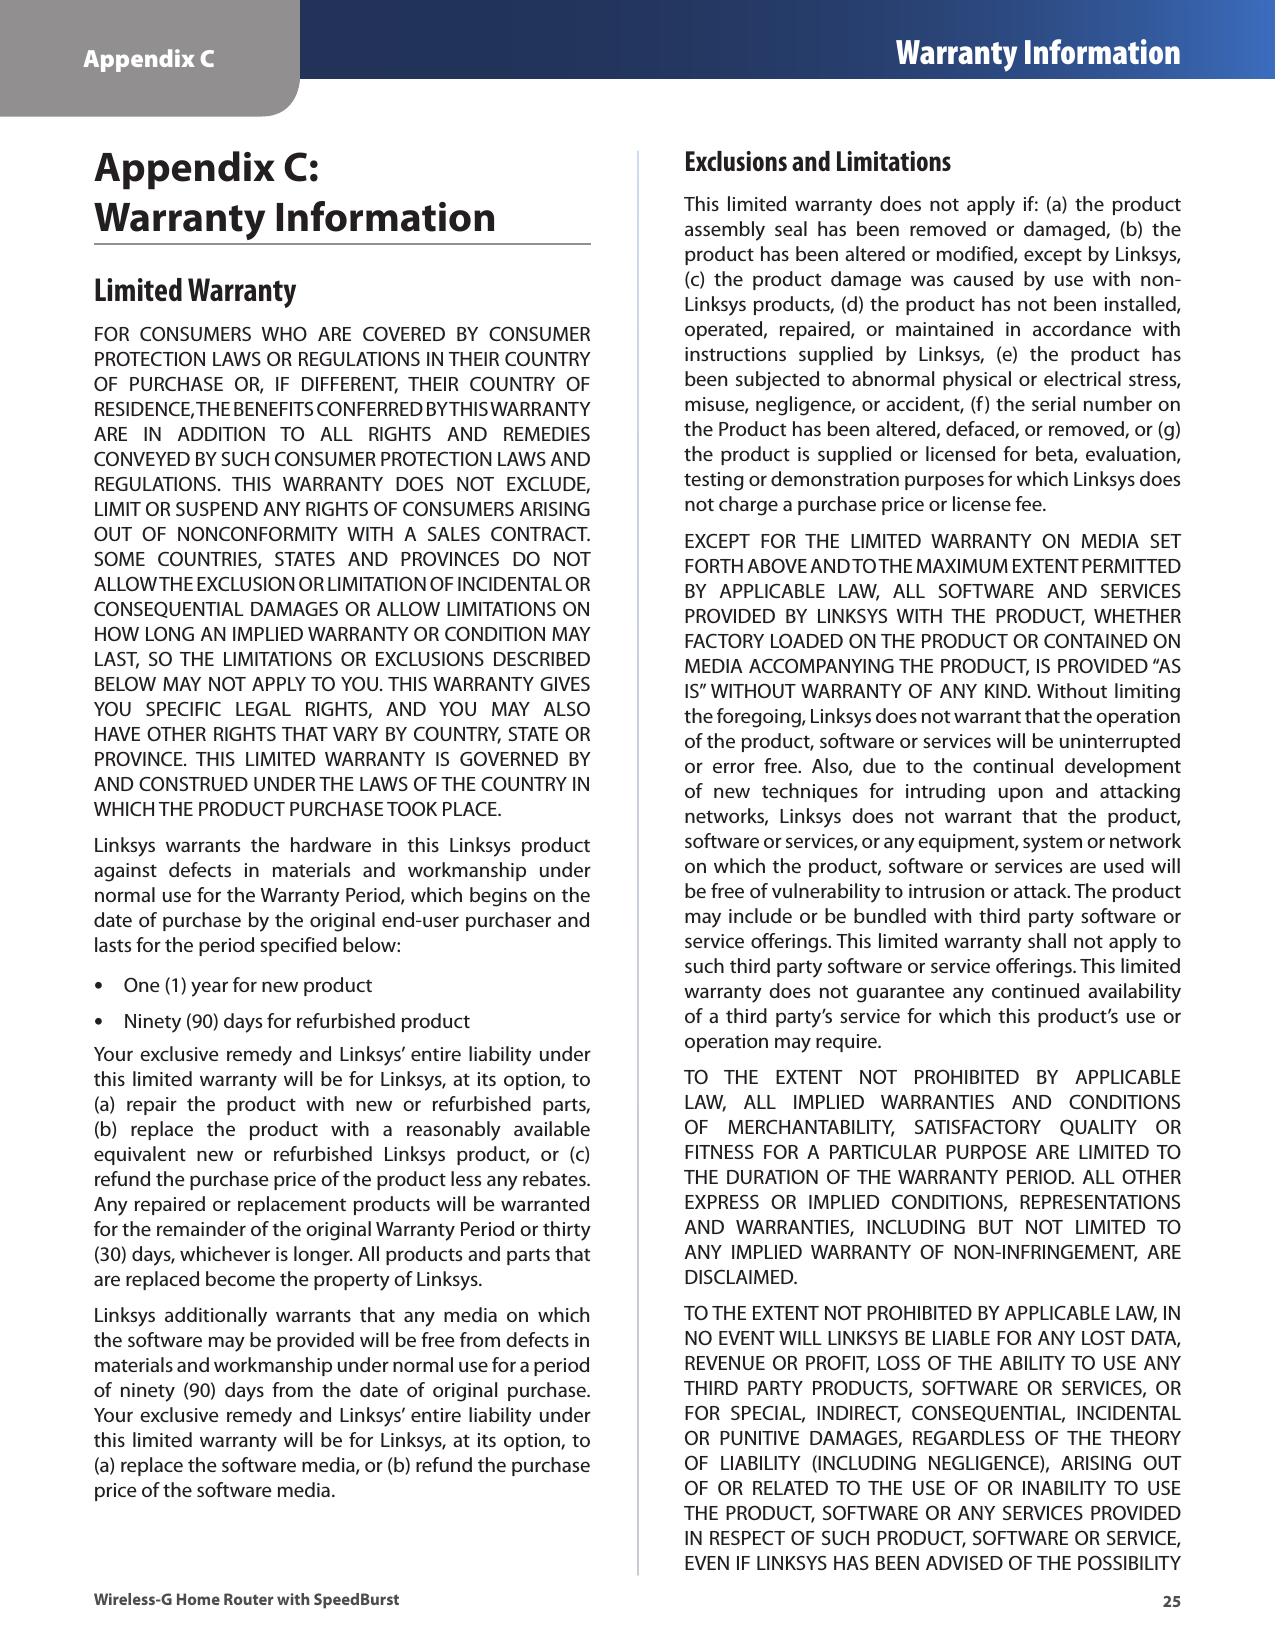 Appendix C Warranty Information25Wireless-G Home Router with SpeedBurstAppendix C:  Warranty InformationLimited WarrantyFOR  CONSUMERS  WHO  ARE  COVERED  BY  CONSUMER PROTECTION LAWS OR REGULATIONS IN THEIR COUNTRY OF  PURCHASE  OR,  IF  DIFFERENT,  THEIR  COUNTRY  OF RESIDENCE, THE BENEFITS CONFERRED BY THIS WARRANTY ARE  IN  ADDITION  TO  ALL  RIGHTS  AND  REMEDIES CONVEYED BY SUCH CONSUMER PROTECTION LAWS AND REGULATIONS.  THIS  WARRANTY  DOES  NOT  EXCLUDE, LIMIT OR SUSPEND ANY RIGHTS OF CONSUMERS ARISING OUT  OF  NONCONFORMITY  WITH  A  SALES  CONTRACT. SOME  COUNTRIES,  STATES  AND  PROVINCES  DO  NOT ALLOW THE EXCLUSION OR LIMITATION OF INCIDENTAL OR CONSEQUENTIAL DAMAGES OR ALLOW LIMITATIONS ON HOW LONG AN IMPLIED WARRANTY OR CONDITION MAY LAST,  SO  THE  LIMITATIONS  OR  EXCLUSIONS  DESCRIBED BELOW MAY NOT APPLY TO YOU. THIS WARRANTY GIVES YOU  SPECIFIC  LEGAL  RIGHTS,  AND  YOU  MAY  ALSO HAVE OTHER RIGHTS THAT VARY BY COUNTRY, STATE OR PROVINCE.  THIS  LIMITED  WARRANTY  IS  GOVERNED  BY AND CONSTRUED UNDER THE LAWS OF THE COUNTRY IN WHICH THE PRODUCT PURCHASE TOOK PLACE.Linksys  warrants  the  hardware  in  this  Linksys  product against  defects  in  materials  and  workmanship  under normal use for the Warranty Period, which begins on the date of purchase by the original end-user purchaser and lasts for the period specified below: •One (1) year for new product •Ninety (90) days for refurbished productYour  exclusive remedy and Linksys’  entire liability under this limited warranty will be for Linksys, at its option, to (a)  repair  the  product  with  new  or  refurbished  parts, (b)  replace  the  product  with  a  reasonably  available equivalent  new  or  refurbished  Linksys  product,  or  (c) refund the purchase price of the product less any rebates. Any repaired or replacement products will be warranted for the remainder of the original Warranty Period or thirty (30) days, whichever is longer. All products and parts that are replaced become the property of Linksys.Linksys  additionally  warrants  that  any  media  on  which the software may be provided will be free from defects in materials and workmanship under normal use for a period of  ninety  (90)  days  from  the  date  of  original  purchase. Your  exclusive remedy and Linksys’  entire liability under this limited warranty will be for Linksys, at its option, to (a) replace the software media, or (b) refund the purchase price of the software media.Exclusions and LimitationsThis  limited  warranty  does  not  apply  if:  (a) the  product assembly  seal  has  been  removed  or  damaged,  (b)  the product has been altered or modified, except by Linksys, (c)  the  product  damage  was  caused  by  use  with  non-Linksys products, (d) the product has not been installed, operated,  repaired,  or  maintained  in  accordance  with instructions  supplied  by  Linksys,  (e)  the  product  has been subjected to abnormal physical or electrical stress, misuse, negligence, or accident, (f) the serial number on the Product has been altered, defaced, or removed, or (g) the product  is supplied  or  licensed for beta,  evaluation, testing or demonstration purposes for which Linksys does not charge a purchase price or license fee.EXCEPT  FOR  THE  LIMITED  WARRANTY  ON  MEDIA  SET FORTH ABOVE AND TO THE MAXIMUM EXTENT PERMITTED BY  APPLICABLE  LAW,  ALL  SOFTWARE  AND  SERVICES PROVIDED  BY  LINKSYS  WITH  THE  PRODUCT,  WHETHER FACTORY LOADED ON THE PRODUCT OR CONTAINED ON MEDIA ACCOMPANYING THE PRODUCT, IS PROVIDED “AS IS” WITHOUT WARRANTY OF ANY KIND. Without limiting the foregoing, Linksys does not warrant that the operation of the product, software or services will be uninterrupted or  error  free.  Also,  due  to  the  continual  development of  new  techniques  for  intruding  upon  and  attacking networks,  Linksys  does  not  warrant  that  the  product, software or services, or any equipment, system or network on which the product, software or services are used will be free of vulnerability to intrusion or attack. The product may include or be bundled with third party software or service offerings. This limited warranty shall not apply to such third party software or service offerings. This limited warranty  does  not  guarantee  any  continued  availability of a  third party’s  service  for  which this  product’s use  or operation may require. TO  THE  EXTENT  NOT  PROHIBITED  BY  APPLICABLE LAW,  ALL  IMPLIED  WARRANTIES  AND  CONDITIONS OF  MERCHANTABILITY,  SATISFACTORY  QUALITY  OR FITNESS  FOR  A  PARTICULAR  PURPOSE  ARE  LIMITED  TO THE  DURATION  OF THE WARRANTY  PERIOD.  ALL OTHER EXPRESS  OR  IMPLIED  CONDITIONS,  REPRESENTATIONS AND  WARRANTIES,  INCLUDING  BUT  NOT  LIMITED  TO ANY  IMPLIED  WARRANTY  OF  NON-INFRINGEMENT,  ARE DISCLAIMED. TO THE EXTENT NOT PROHIBITED BY APPLICABLE LAW, IN NO EVENT WILL LINKSYS BE LIABLE FOR ANY LOST DATA, REVENUE OR  PROFIT, LOSS OF THE ABILITY TO USE ANY THIRD  PARTY  PRODUCTS,  SOFTWARE  OR  SERVICES,  OR FOR  SPECIAL,  INDIRECT,  CONSEQUENTIAL,  INCIDENTAL OR  PUNITIVE  DAMAGES,  REGARDLESS  OF  THE  THEORY OF  LIABILITY  (INCLUDING  NEGLIGENCE),  ARISING  OUT OF  OR  RELATED  TO  THE  USE  OF  OR  INABILITY  TO  USE THE PRODUCT, SOFTWARE OR ANY SERVICES PROVIDED IN RESPECT OF SUCH PRODUCT, SOFTWARE OR SERVICE, EVEN IF LINKSYS HAS BEEN ADVISED OF THE POSSIBILITY 